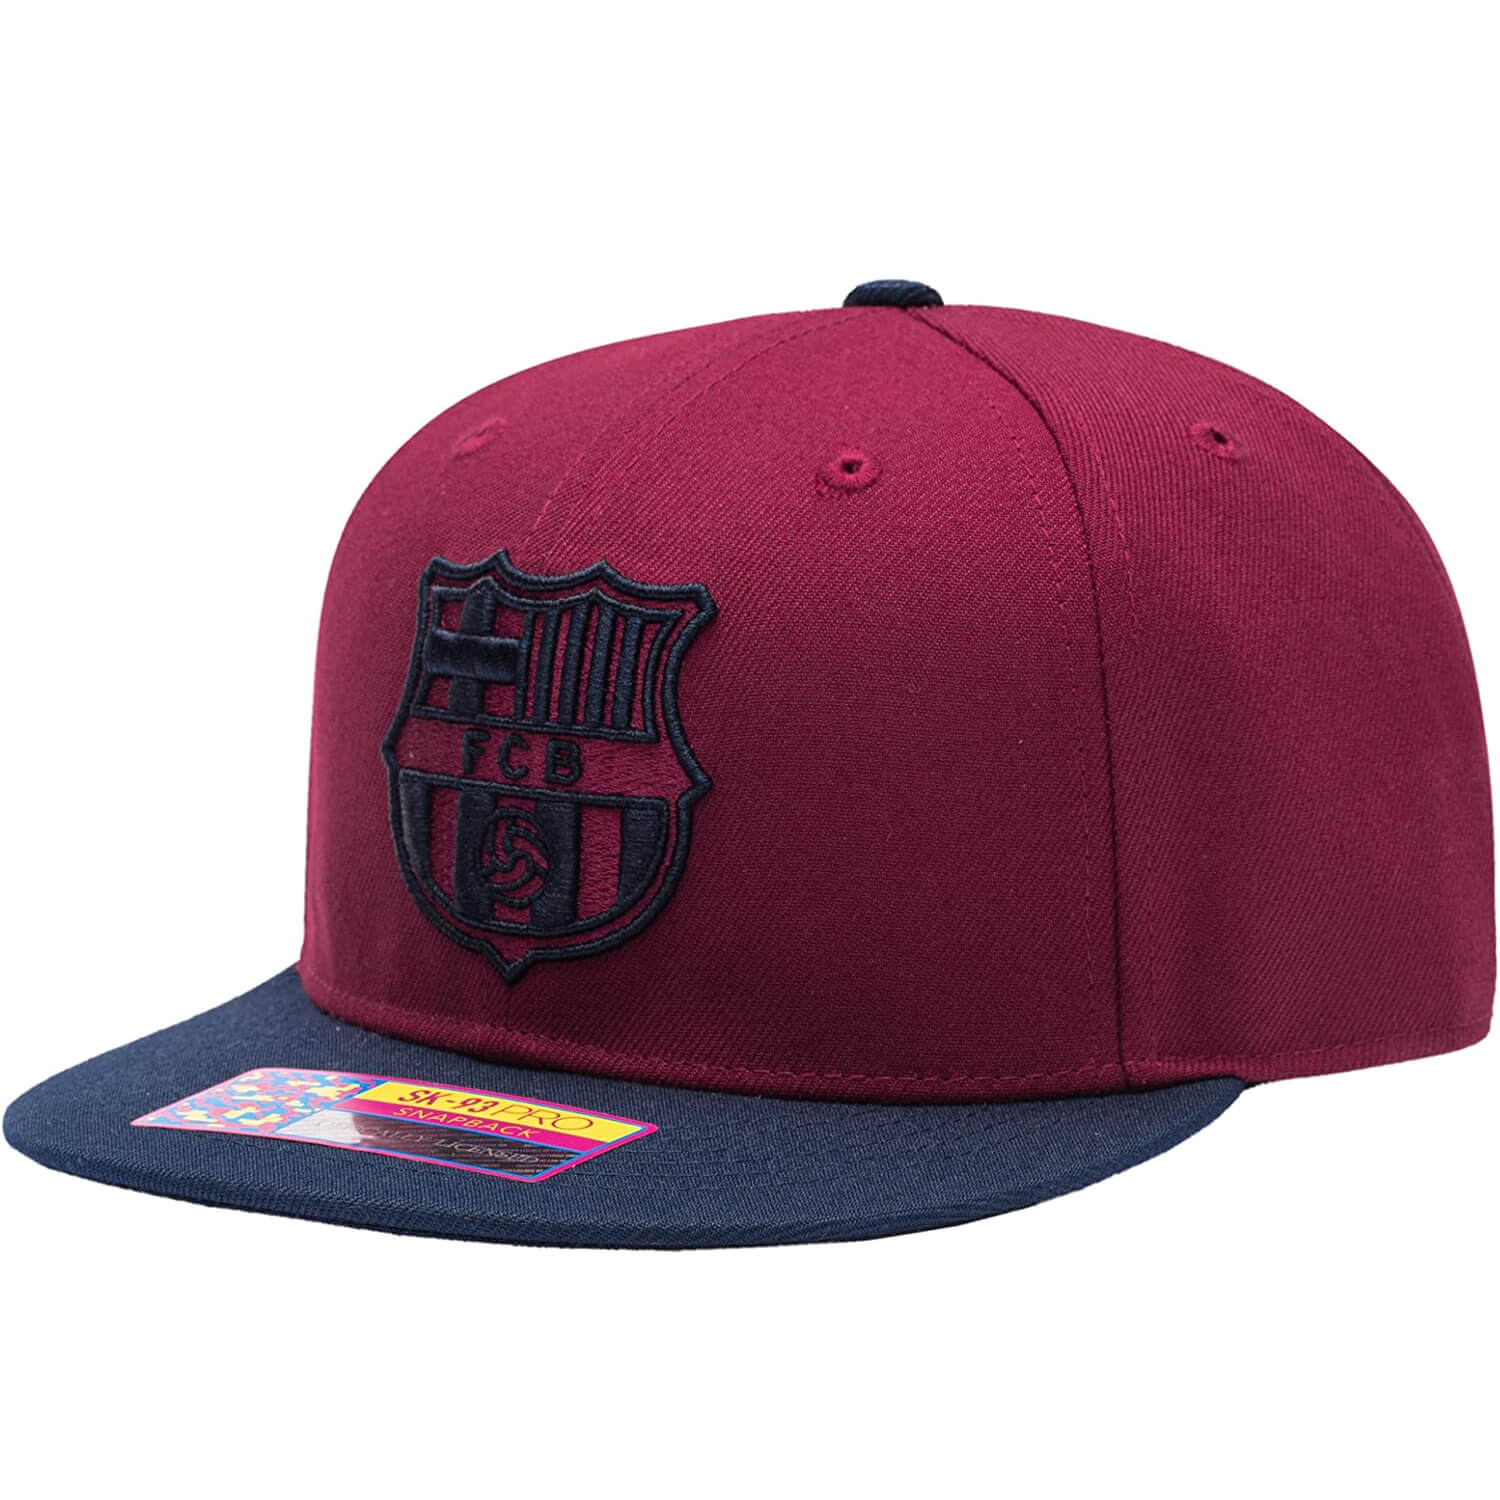 FI Collection Barcelona Team Snapback Hat - Burgundy (Lateral - Side 1)